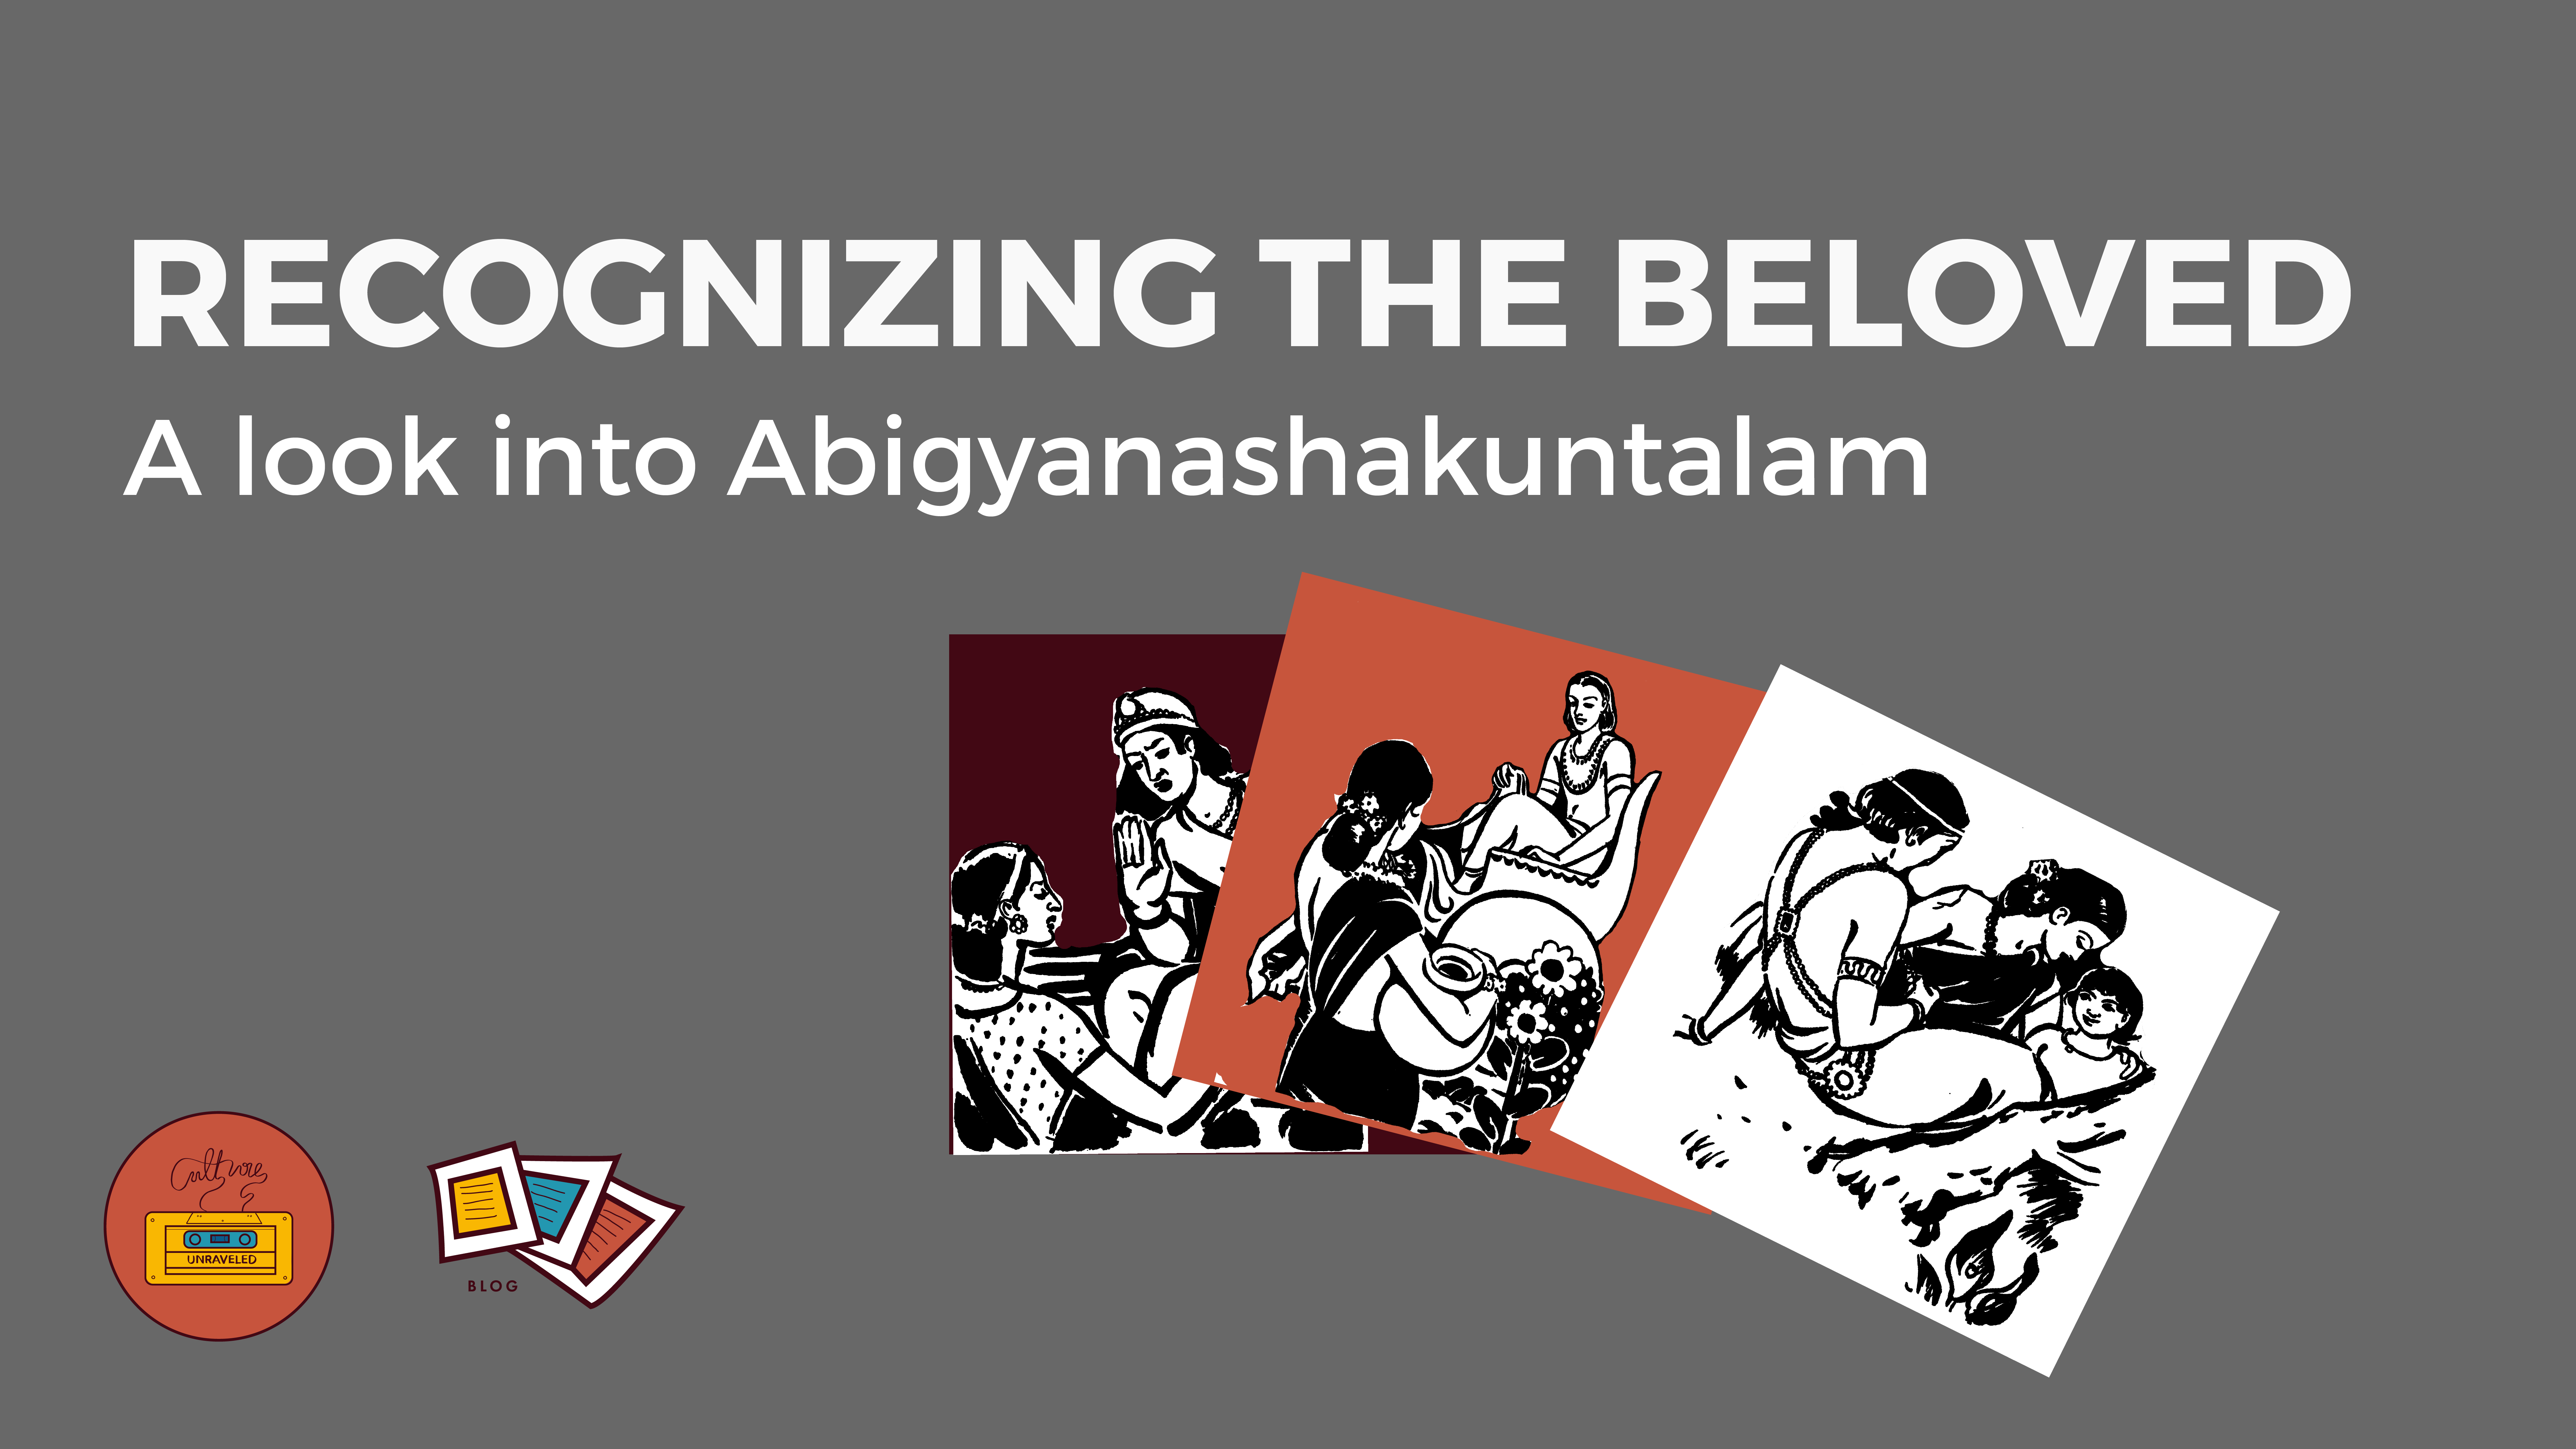 Recognizing the Beloved: A Look into Abigyanashakuntalam